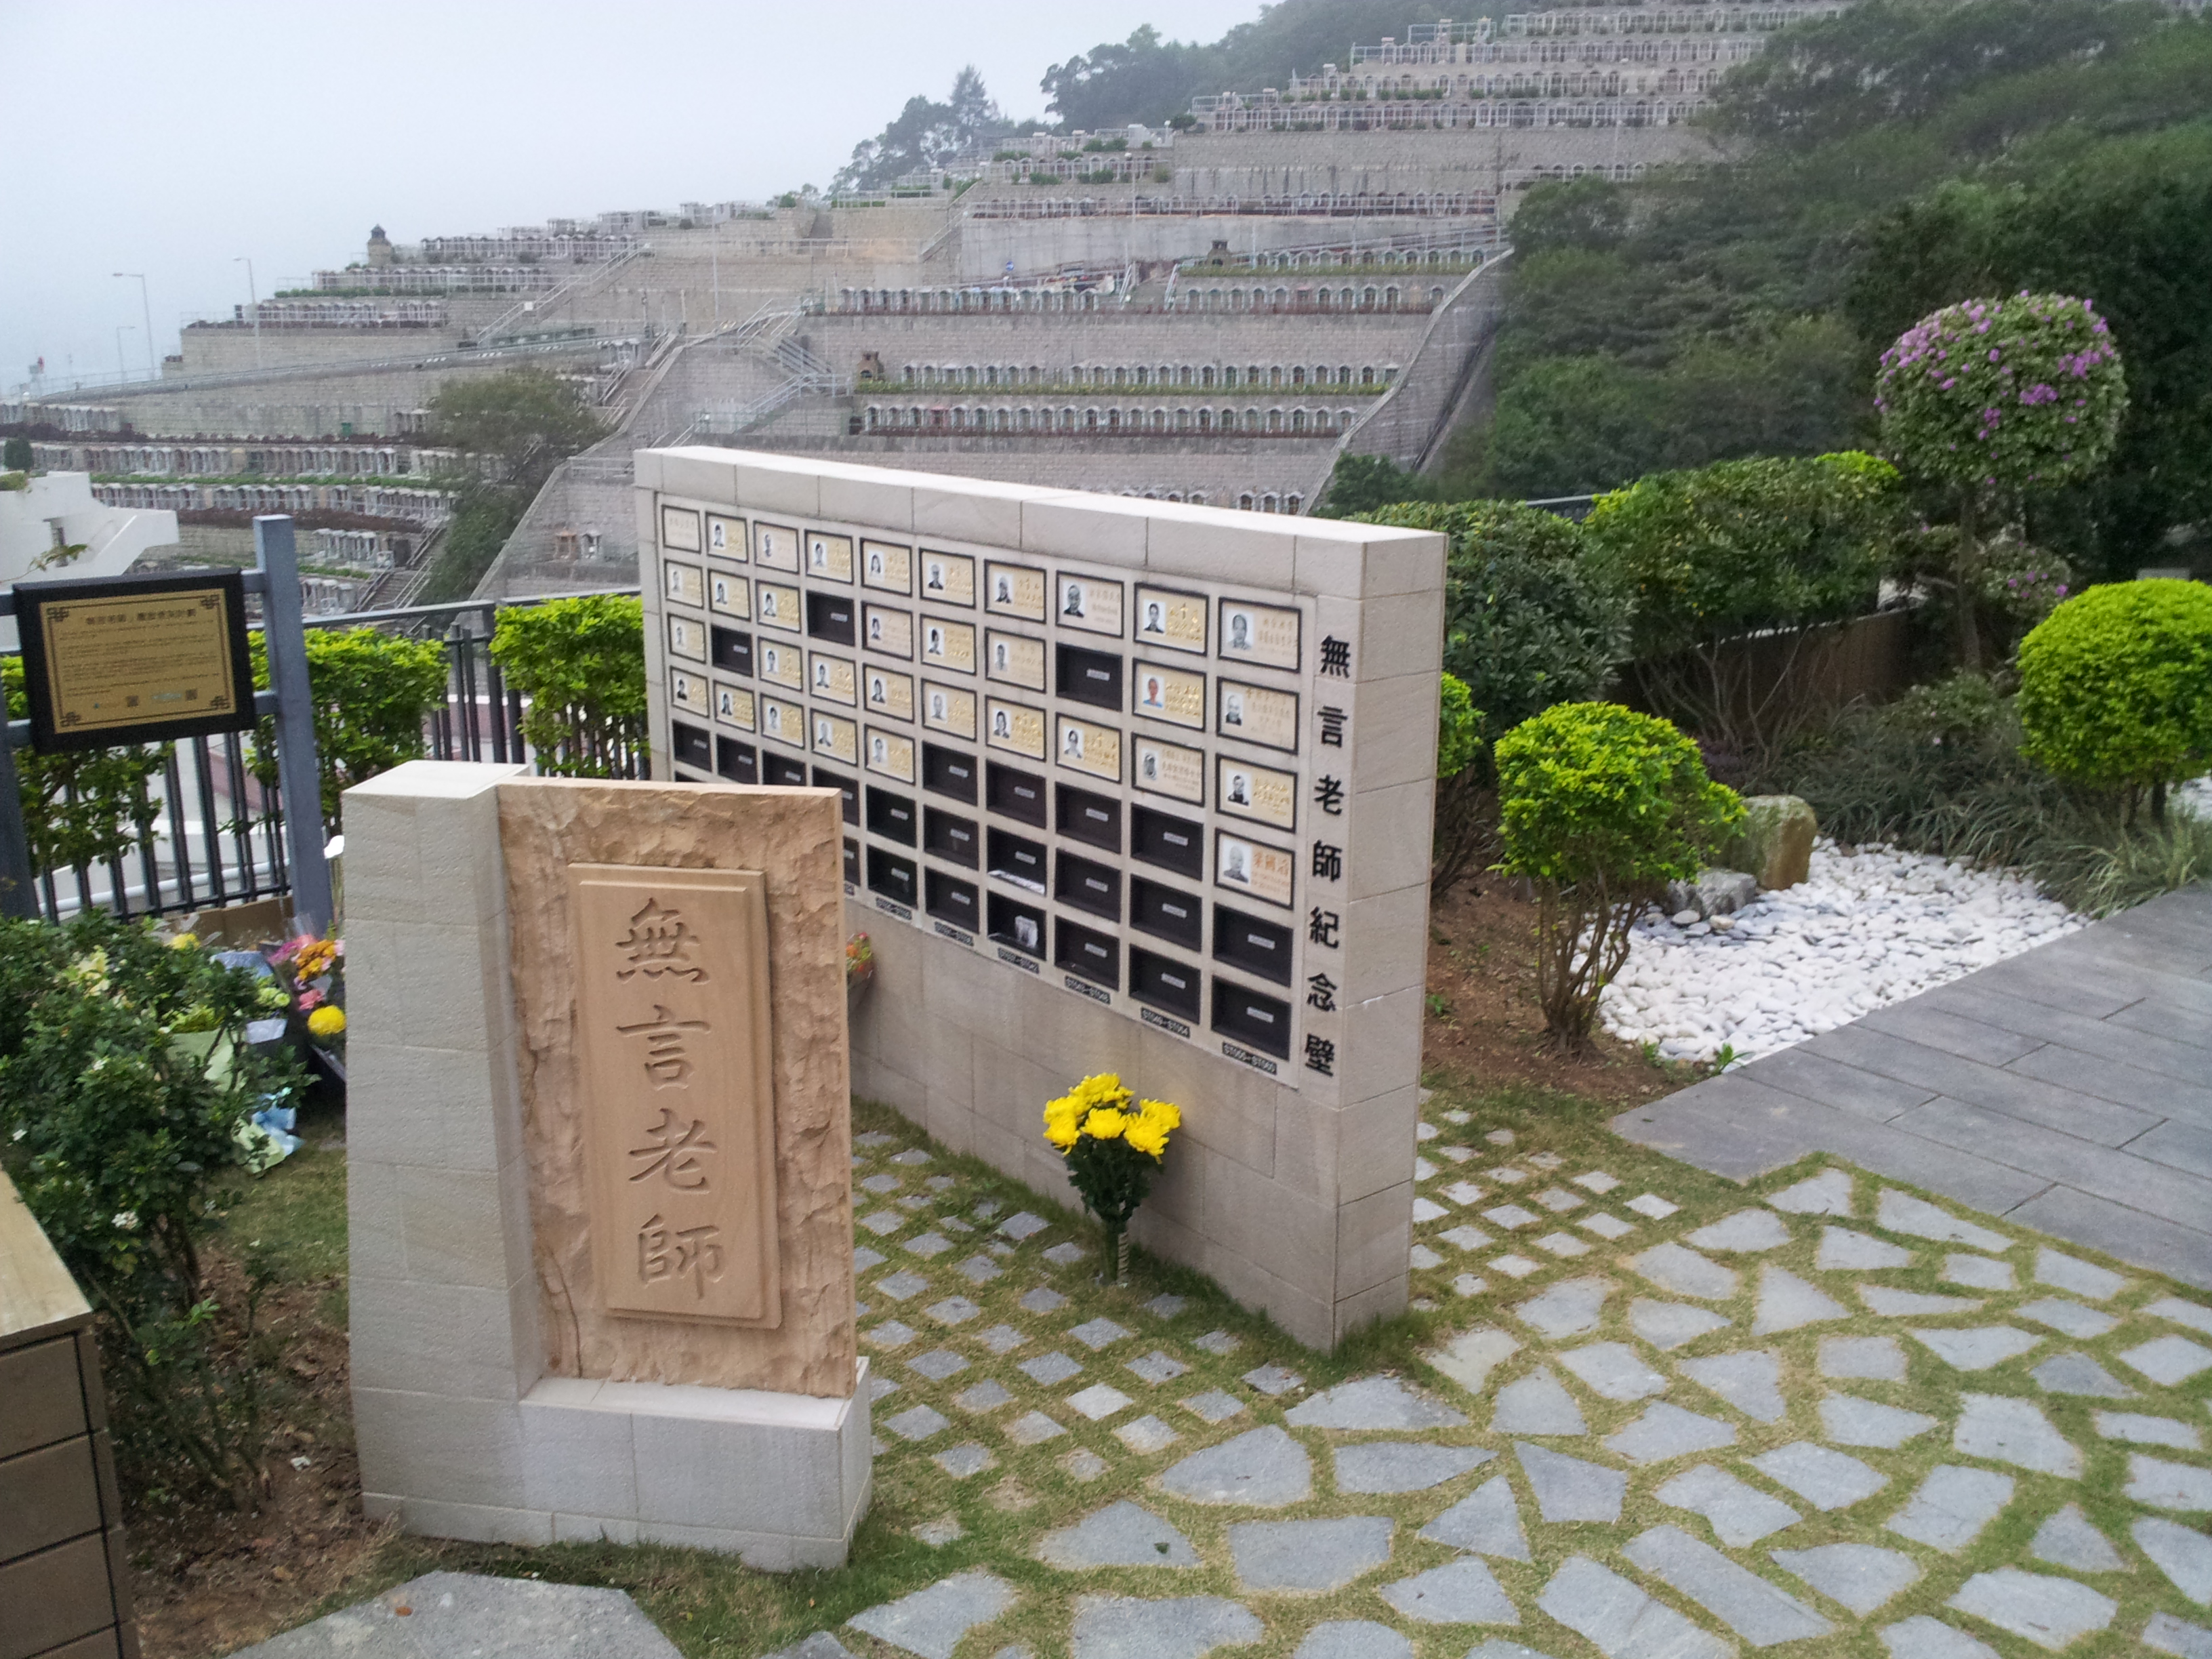 A dedicated memorial wall was established at the Garden of Remembrance